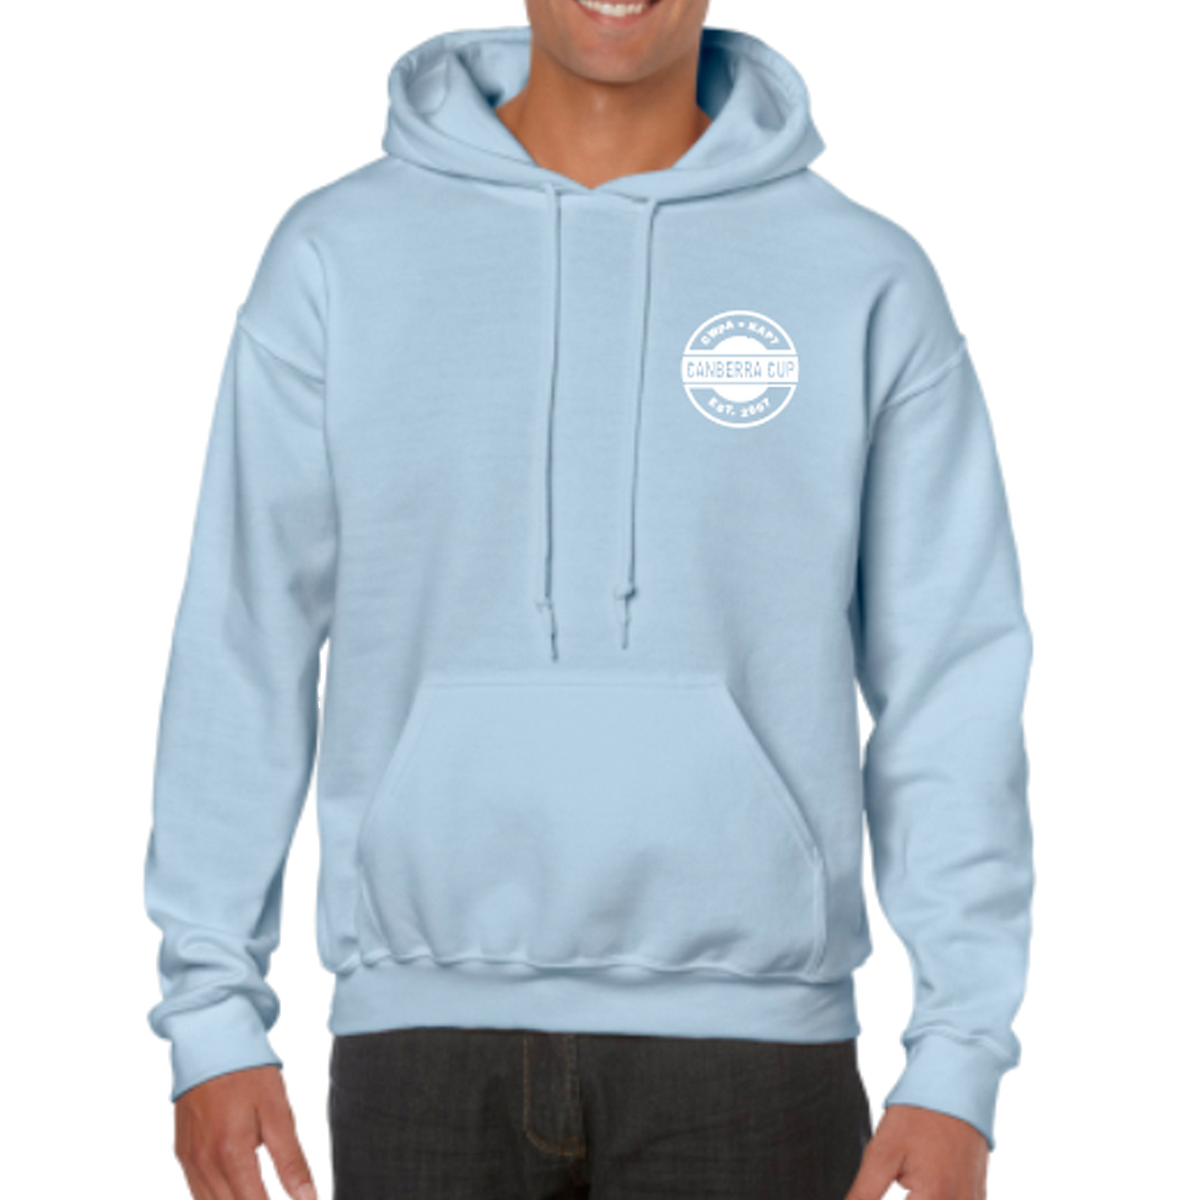 Canberra Cup Hoodie- unisex - now only available at the event – KAP7 ...